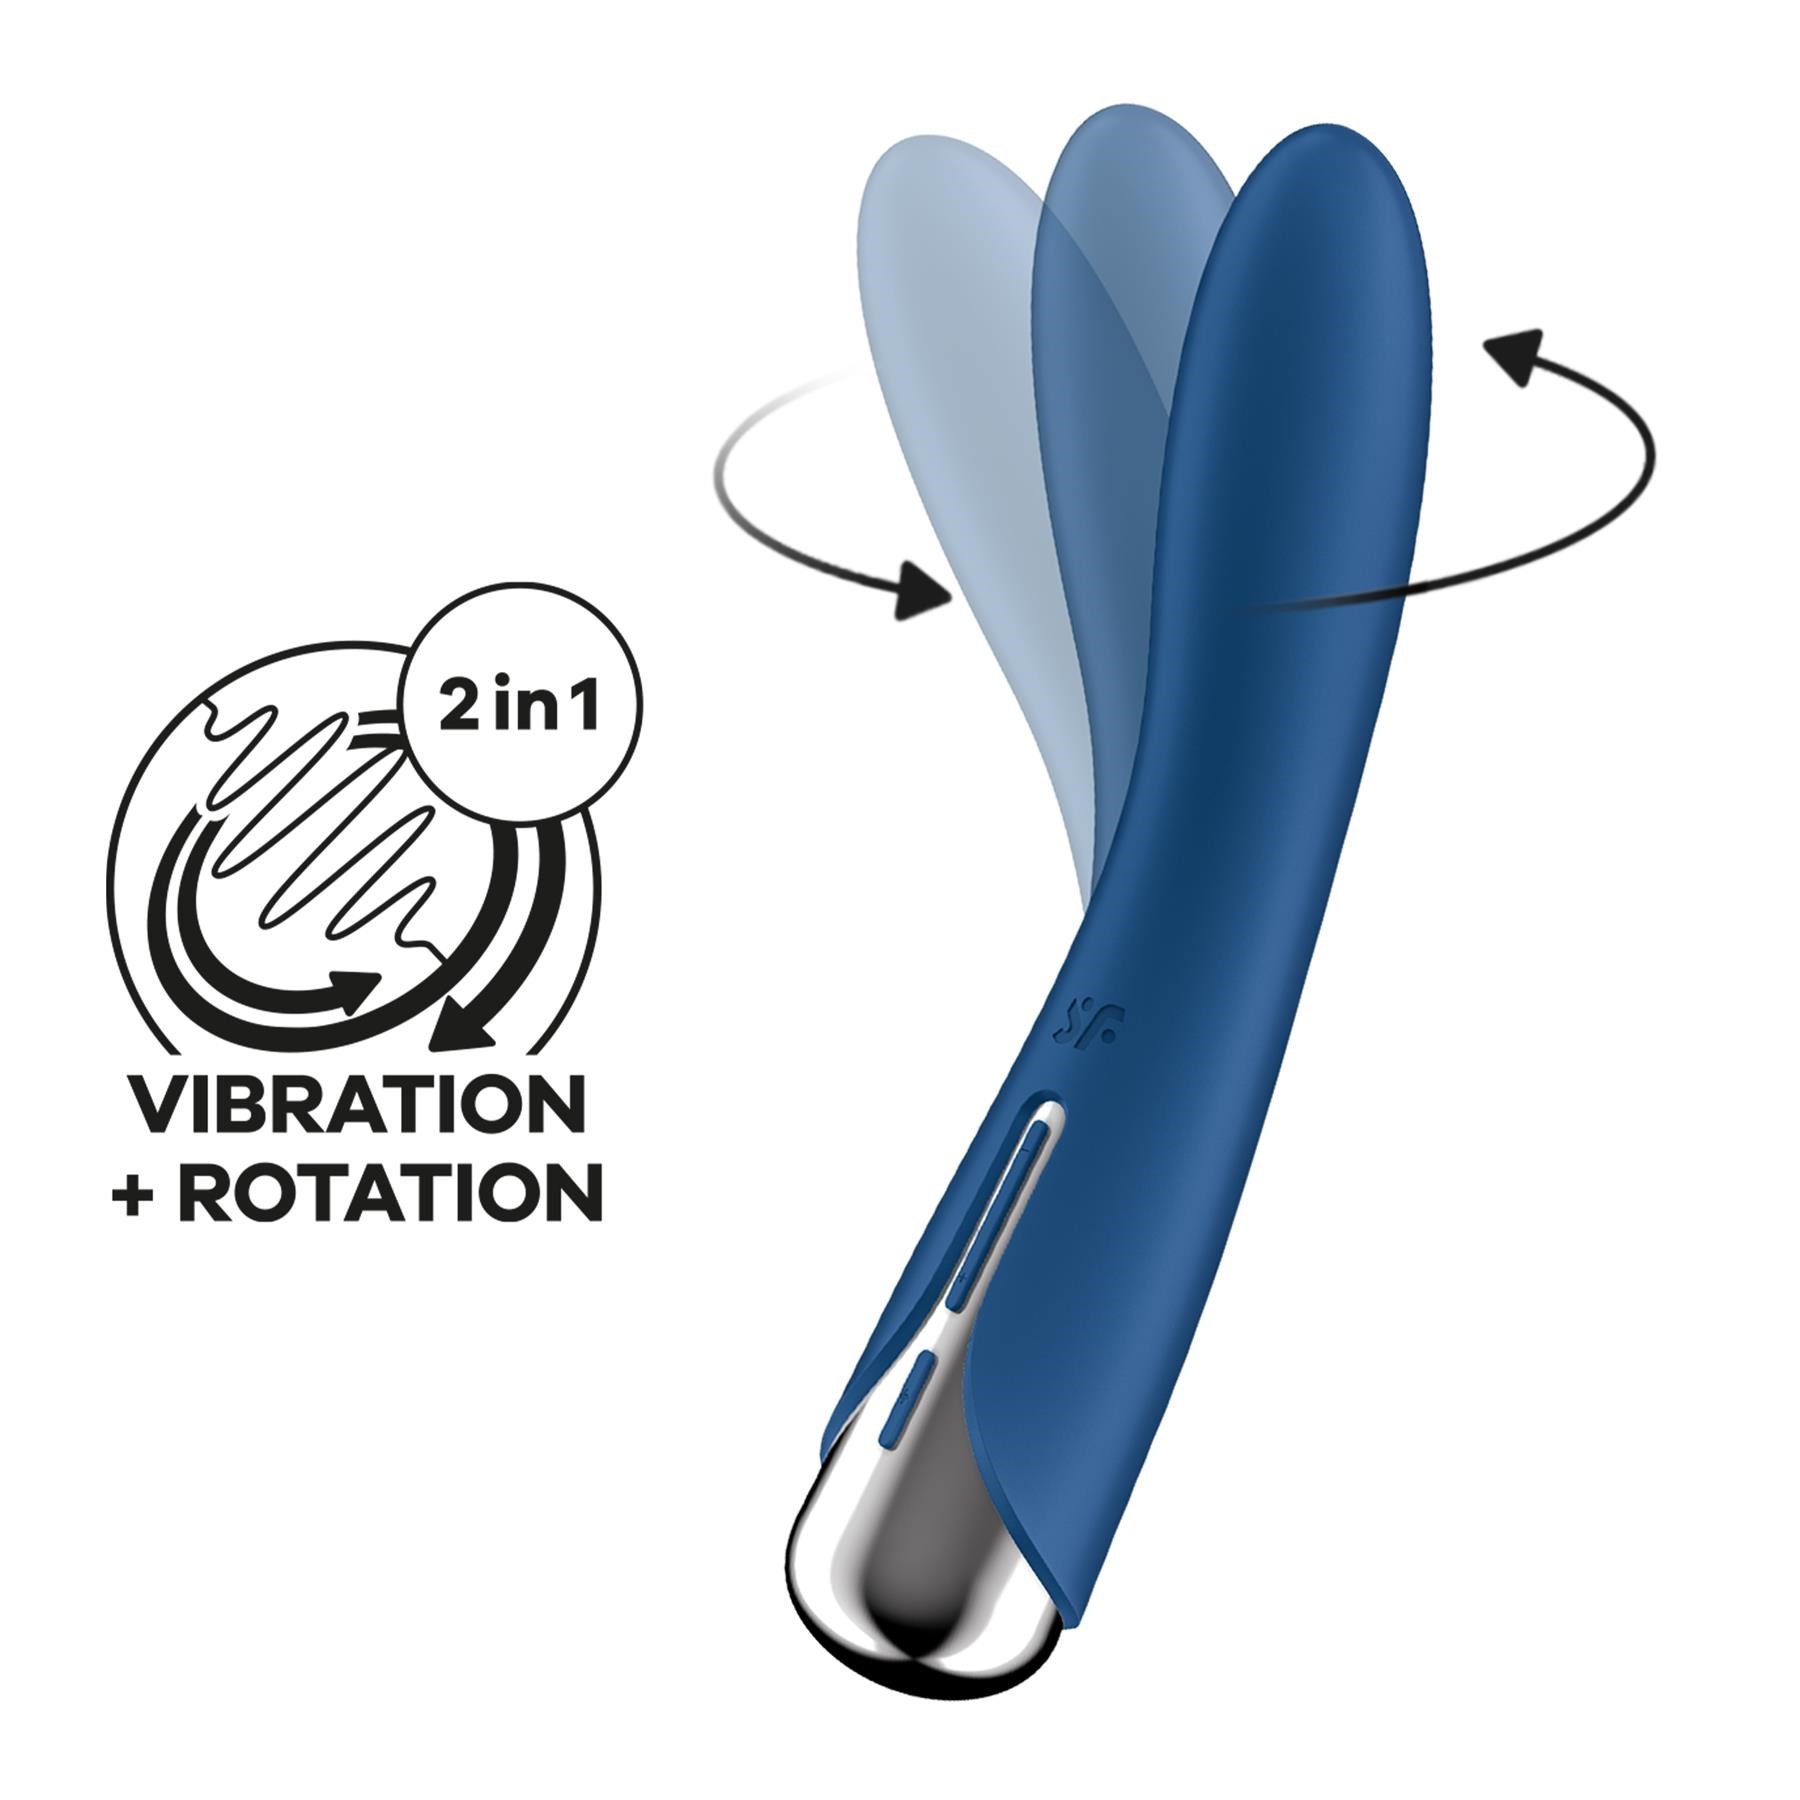 Satisfyer Spinning Vibrator - Product Shot - Showing Spinning Motion